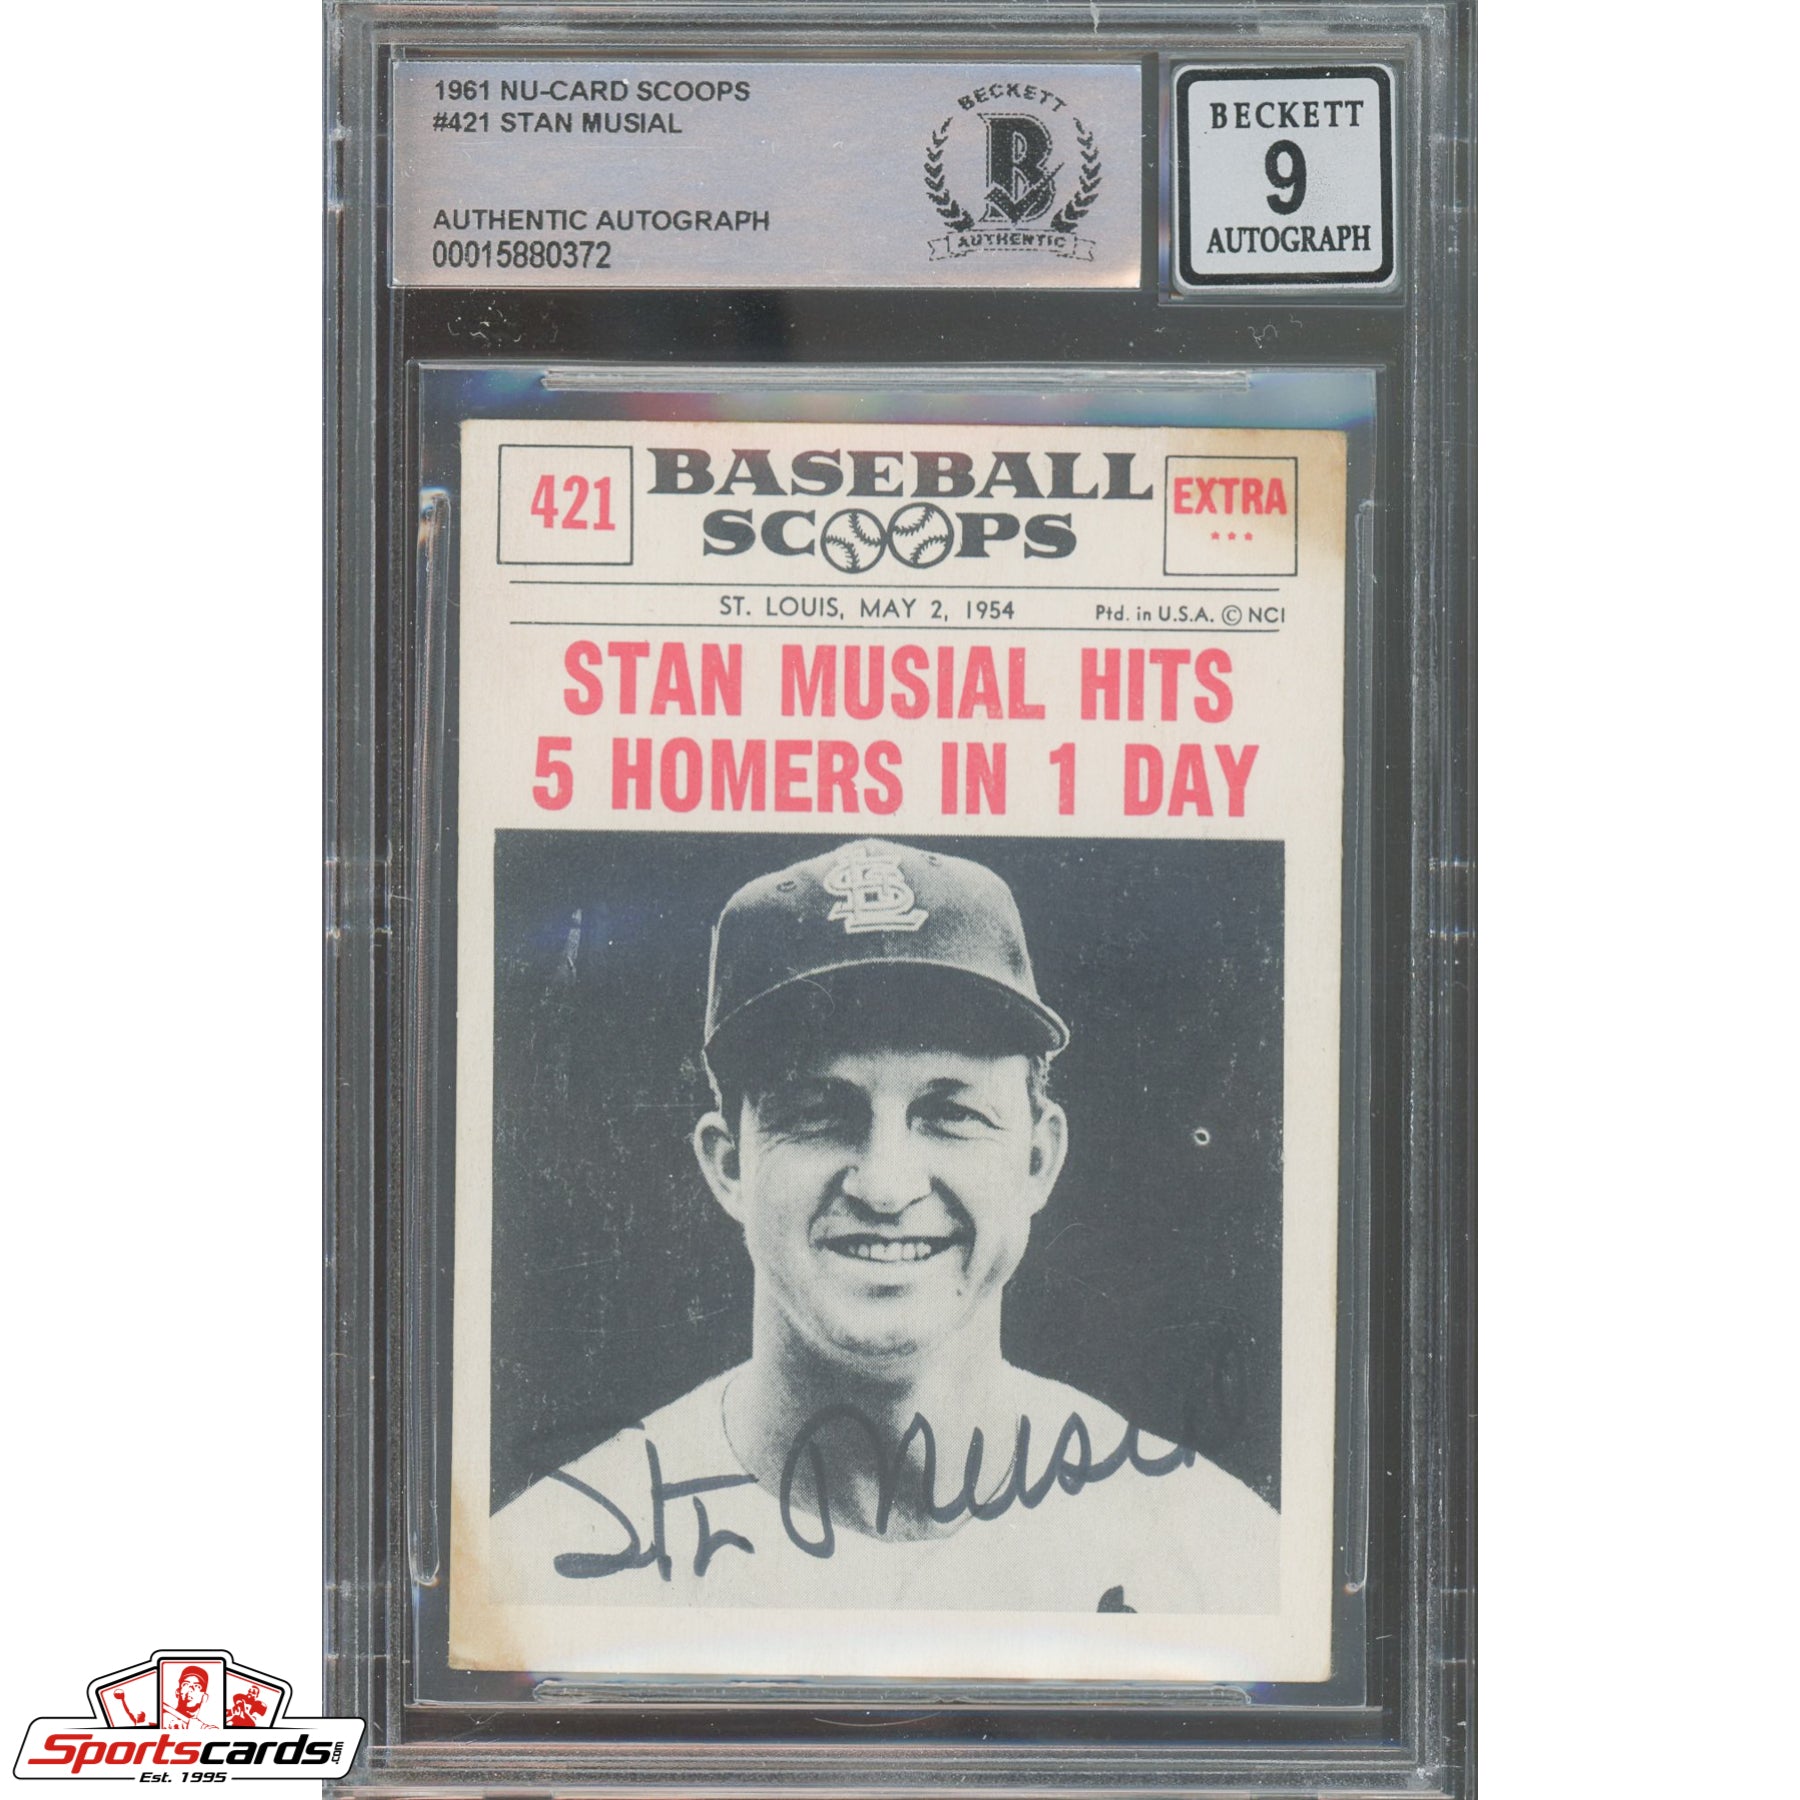 1961 Nu-Card Scoops #421 Stan Musial Signed Auto Beckett BAS Cardinals